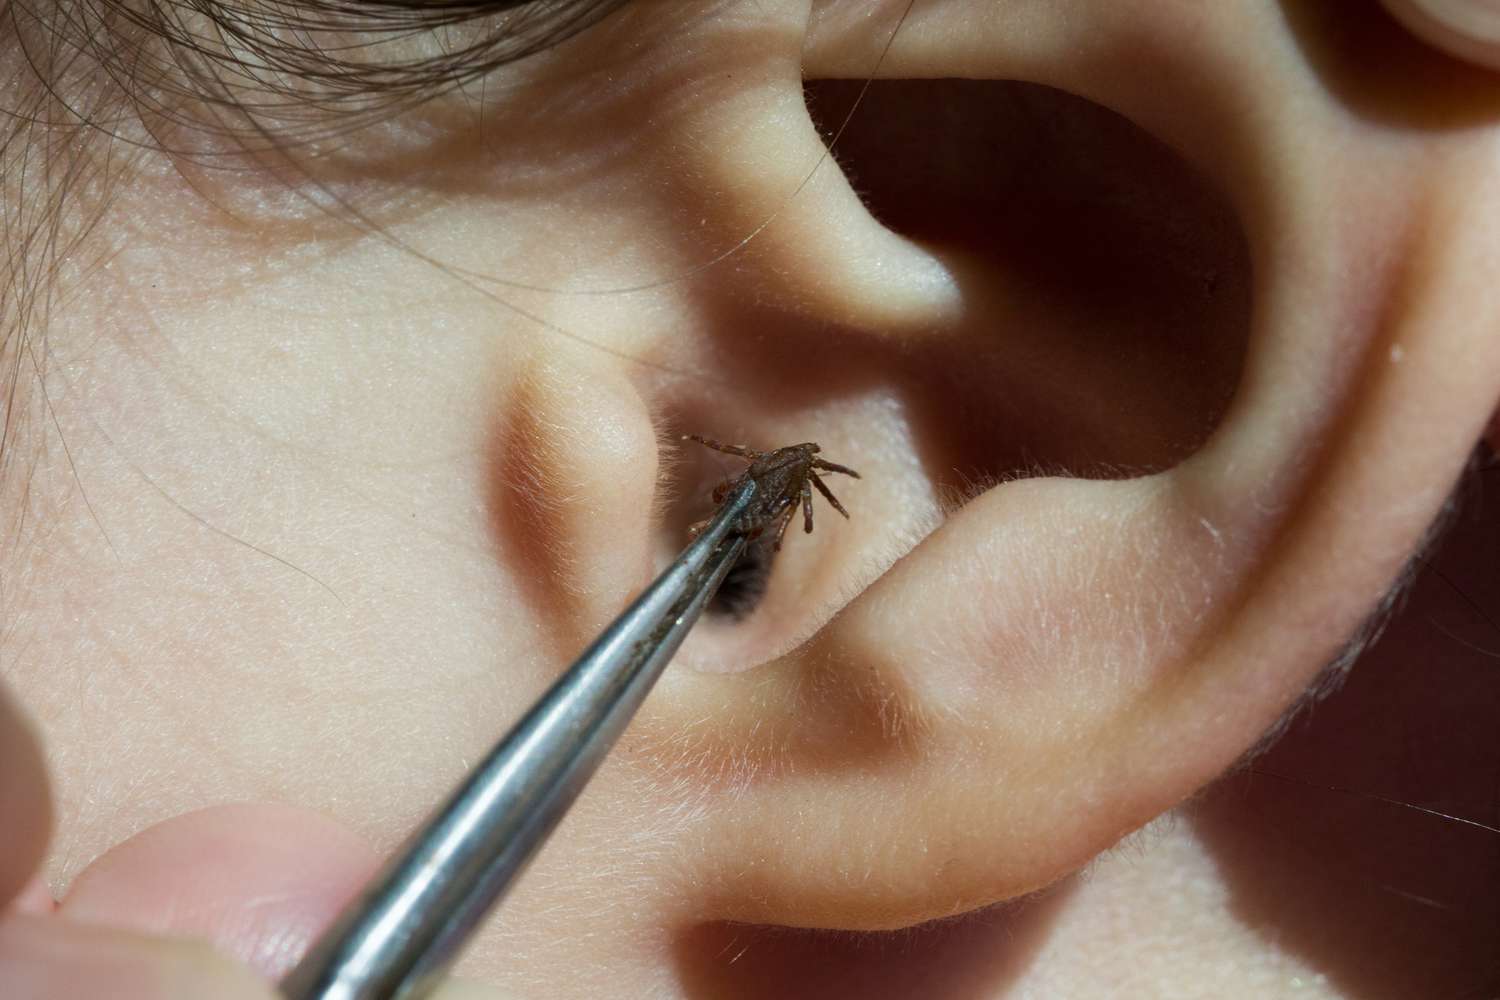 If a live insect enters the ear first aid